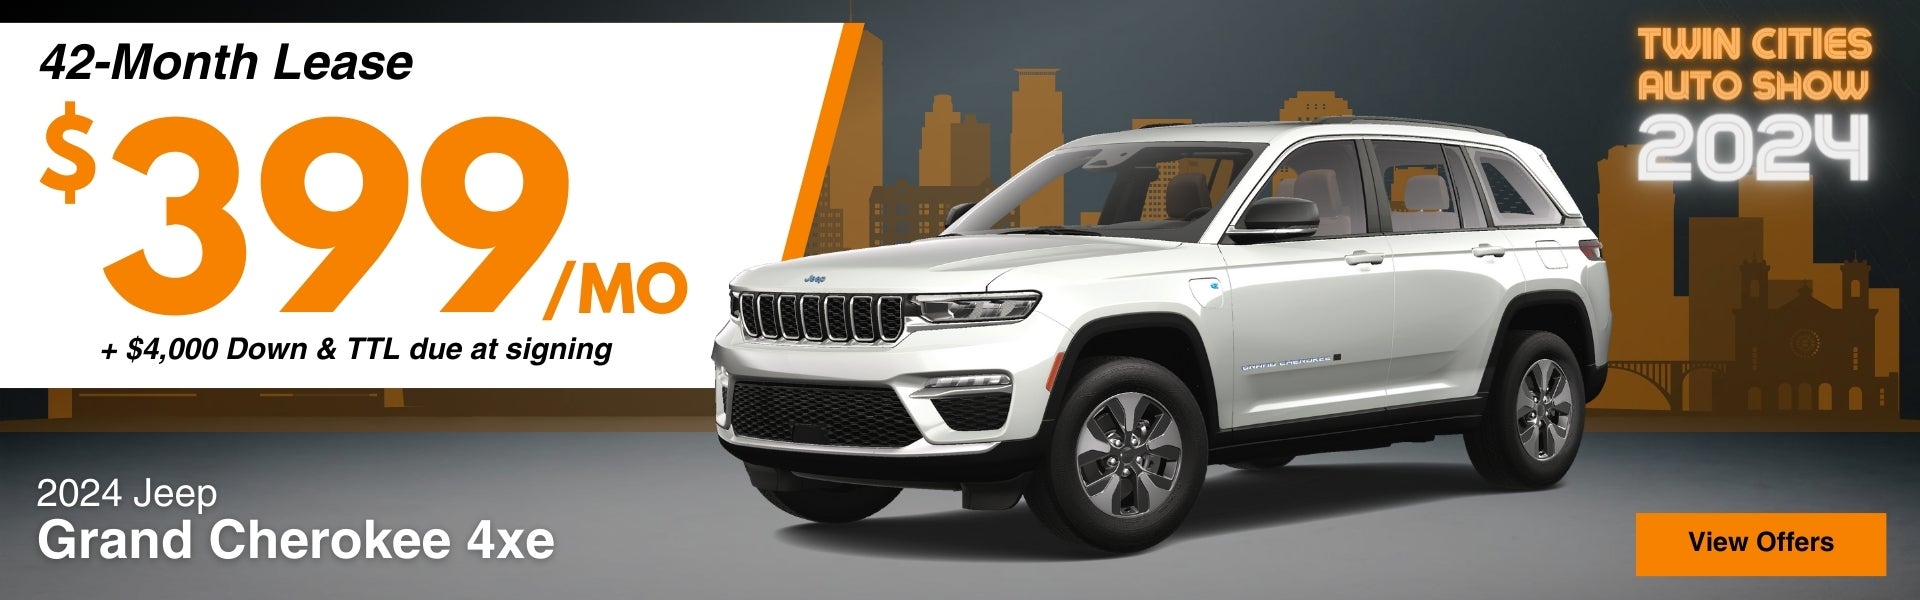 Jeep Grand Cherokee 4xe Lease Offer